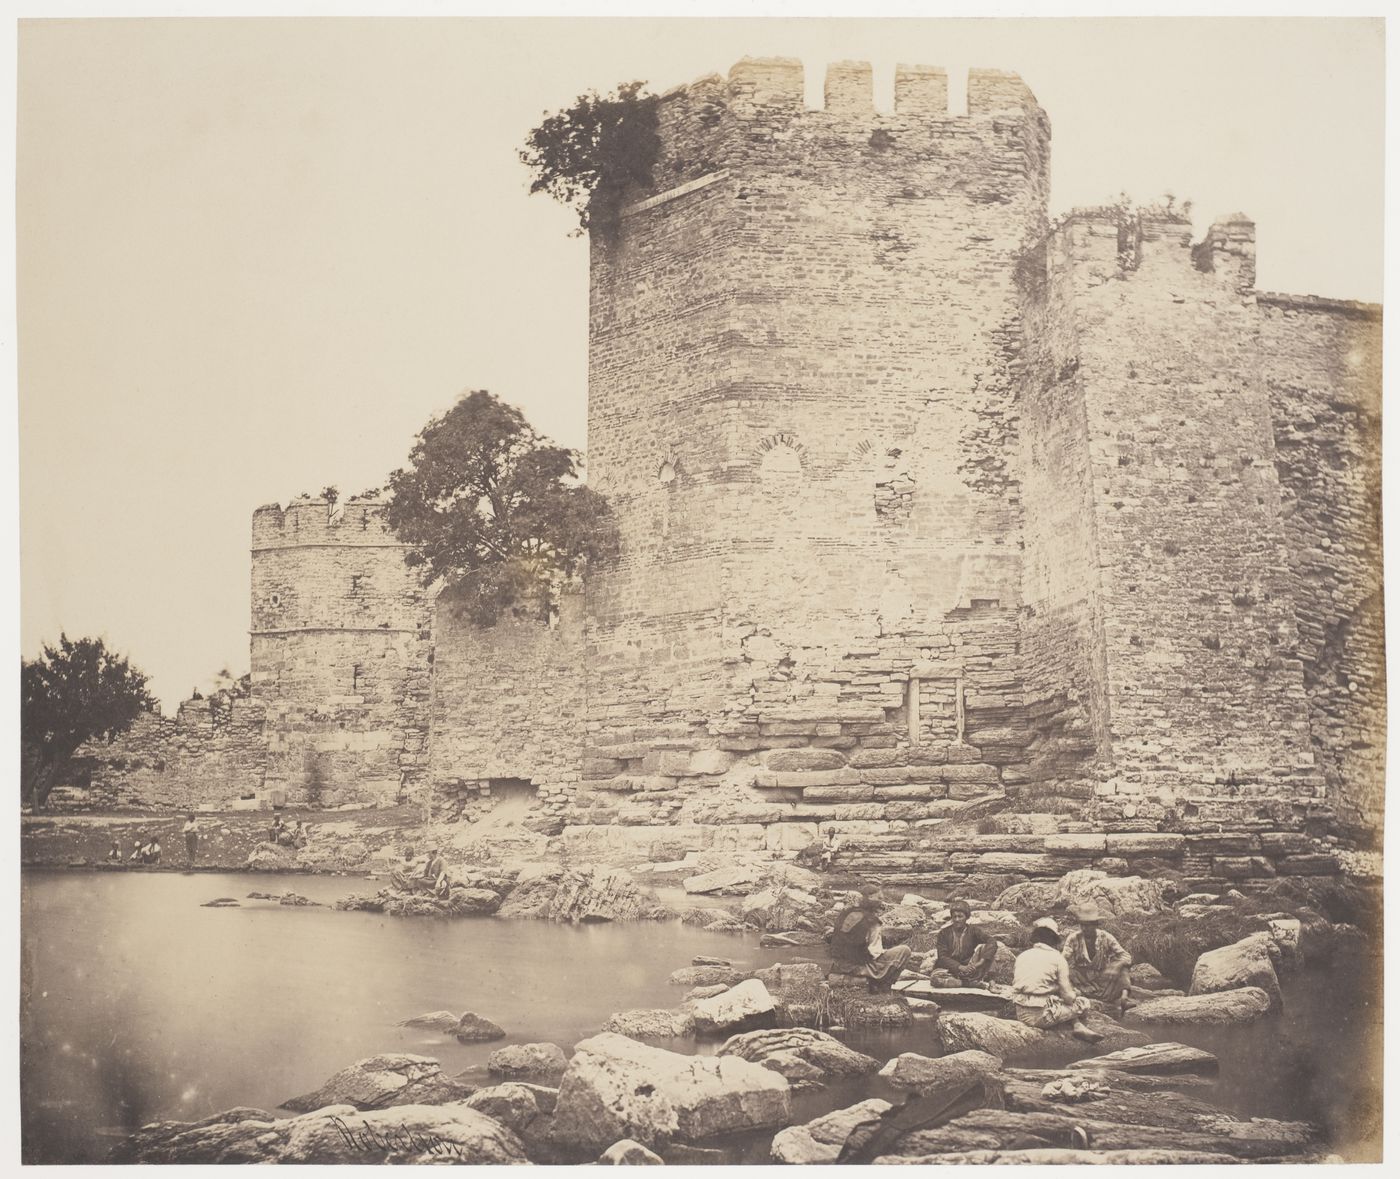 View of a section of the Theodosian Wall showing wall towers with people and a body of water in the foreground, Constantinople (now Istanbul), Ottoman Empire (now in Turkey)